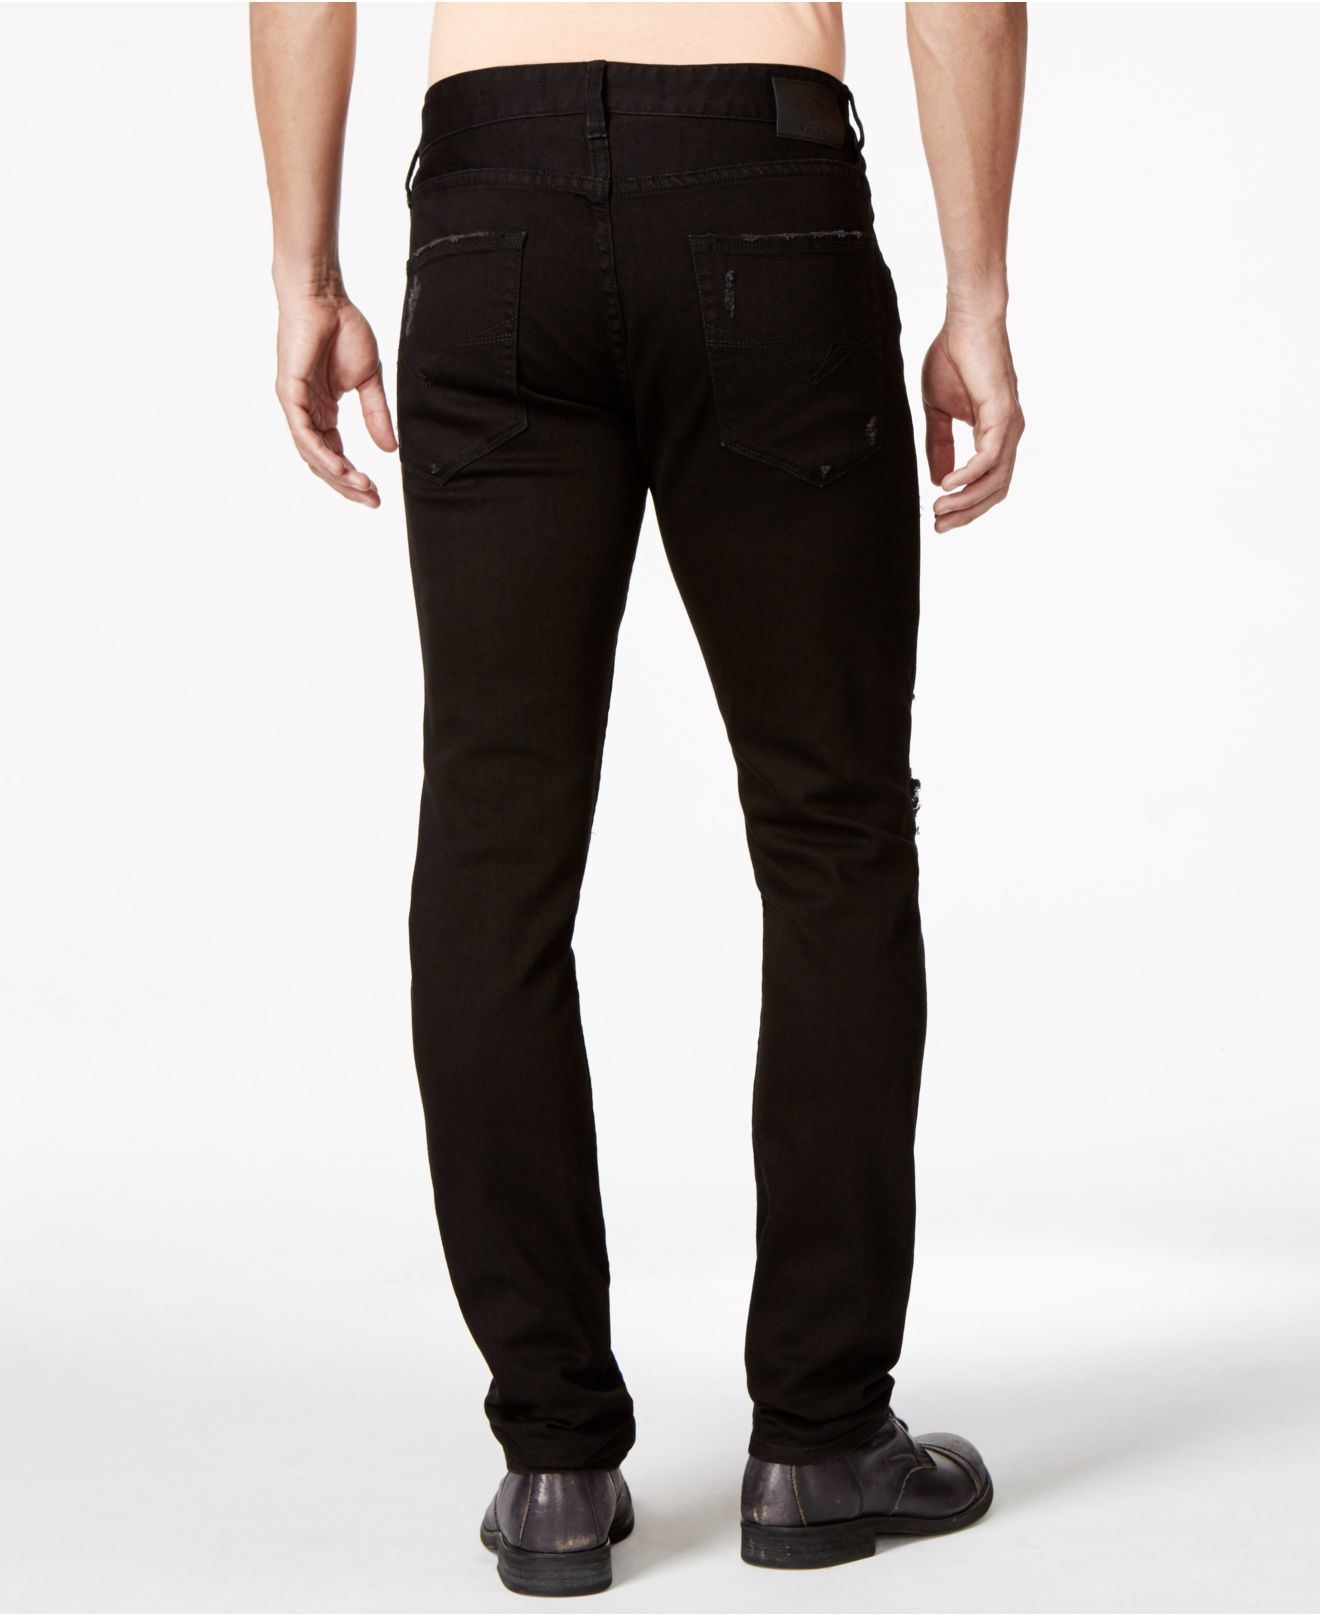 Lyst - Guess Destroyed & Pintucked Slim Fit Tapered Jeans in Black for Men